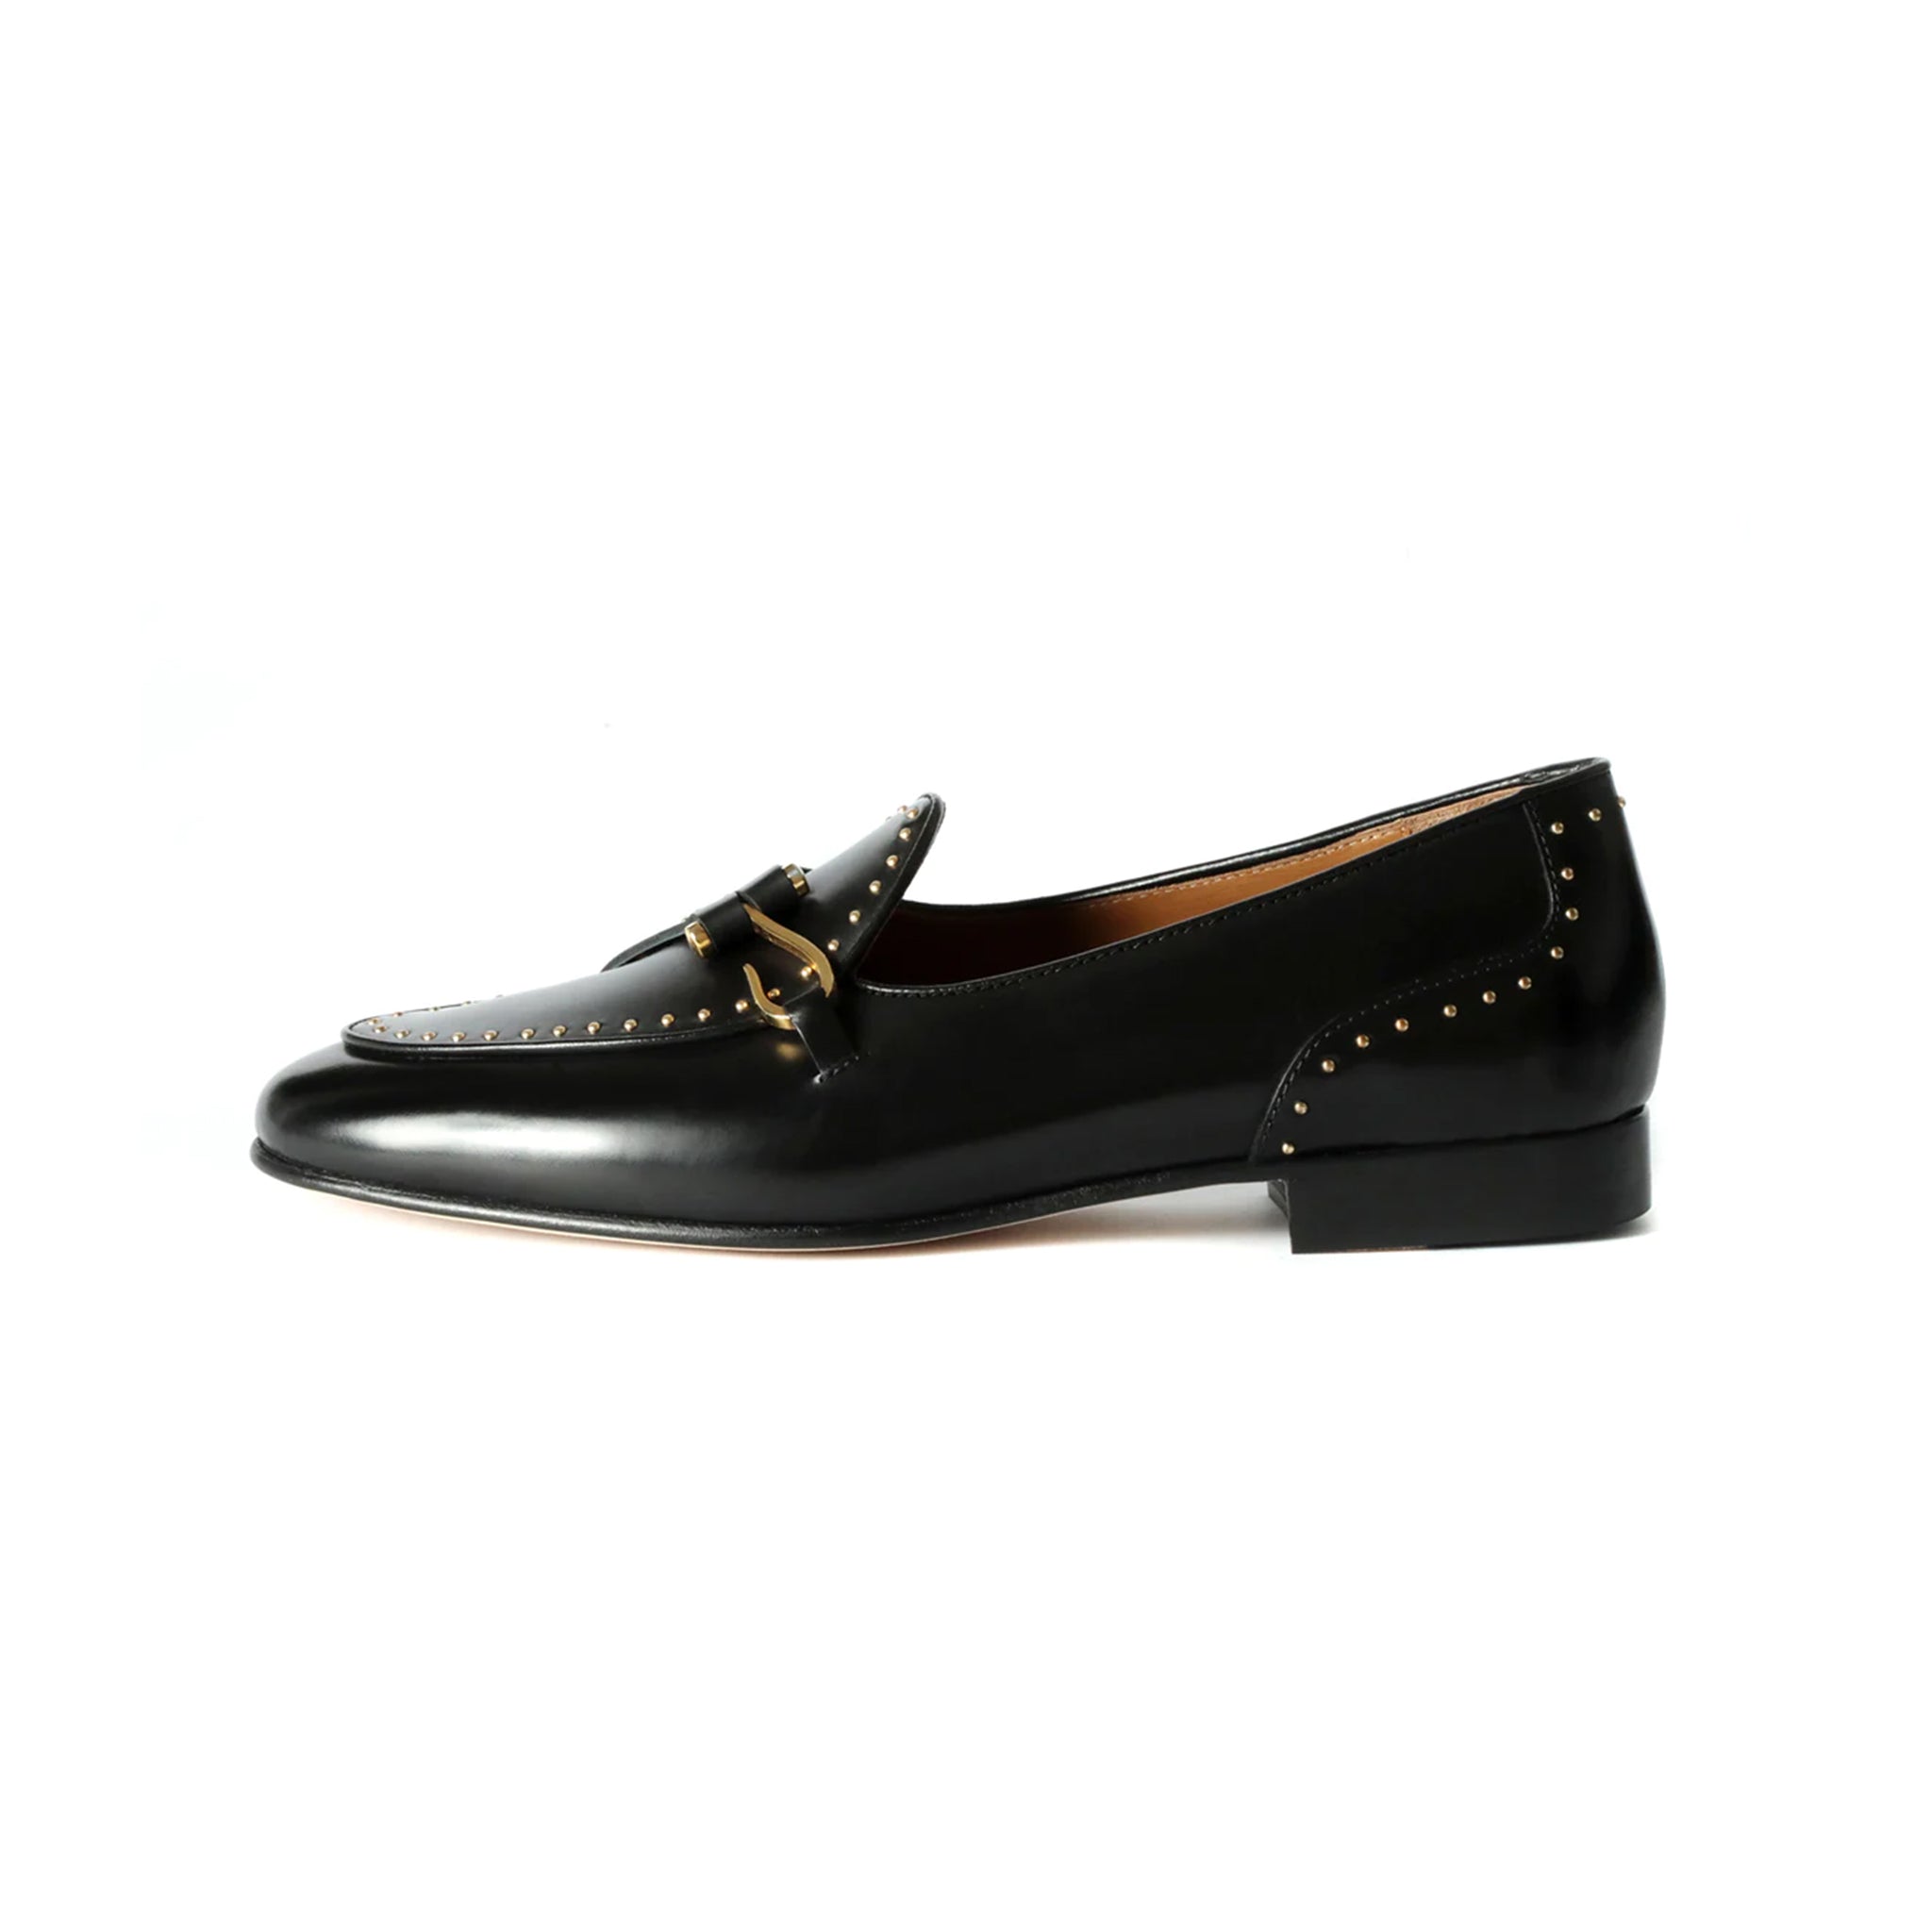 Elias Studded Men's Loafers